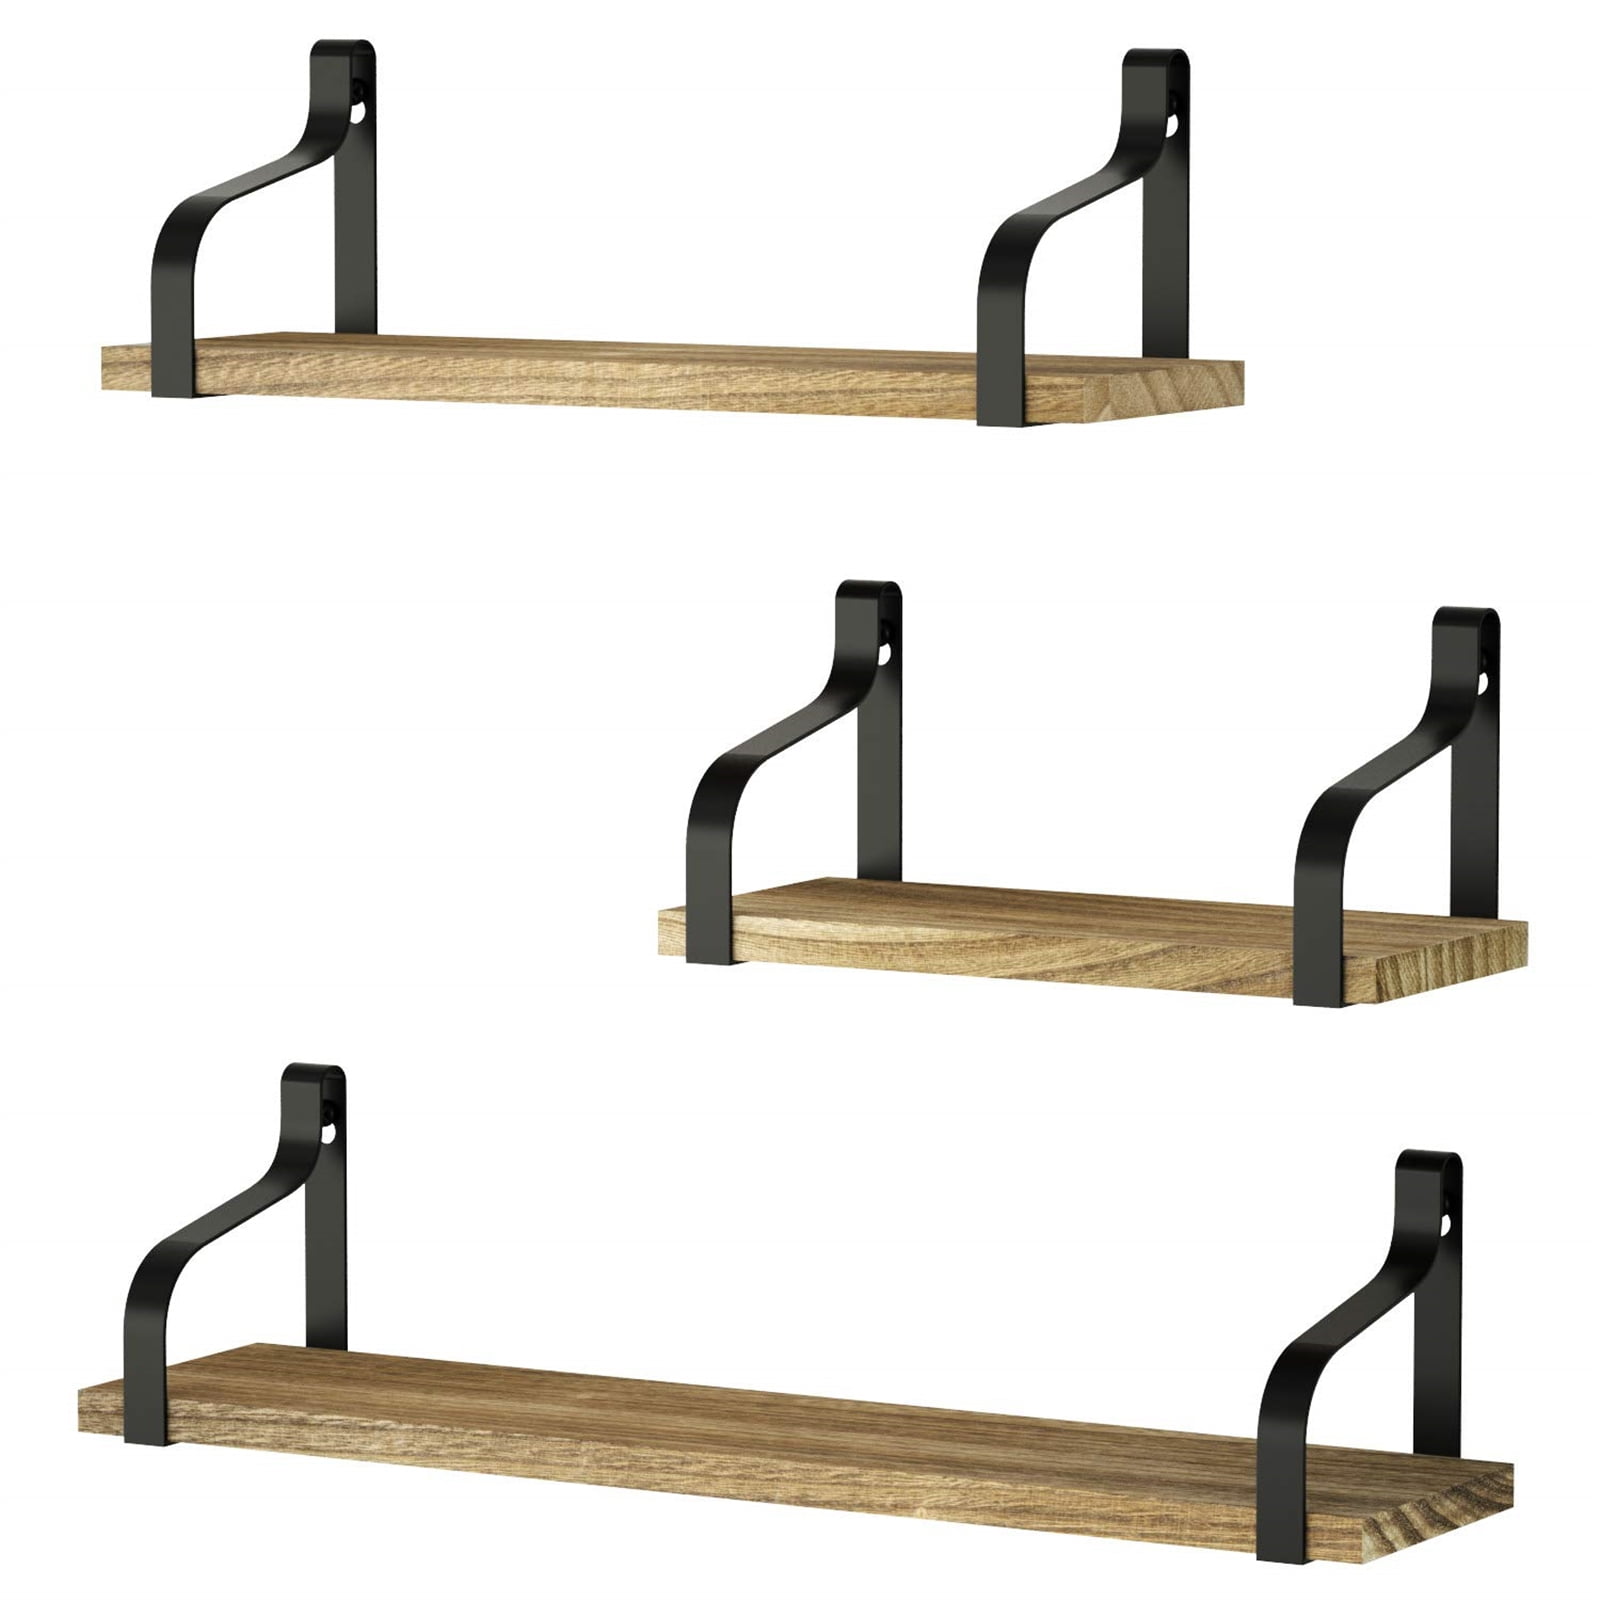 Rustic Paulownia Wood Wall Shelves Set of 3 Details about   Amada Floating Shelves Wall Mounted 